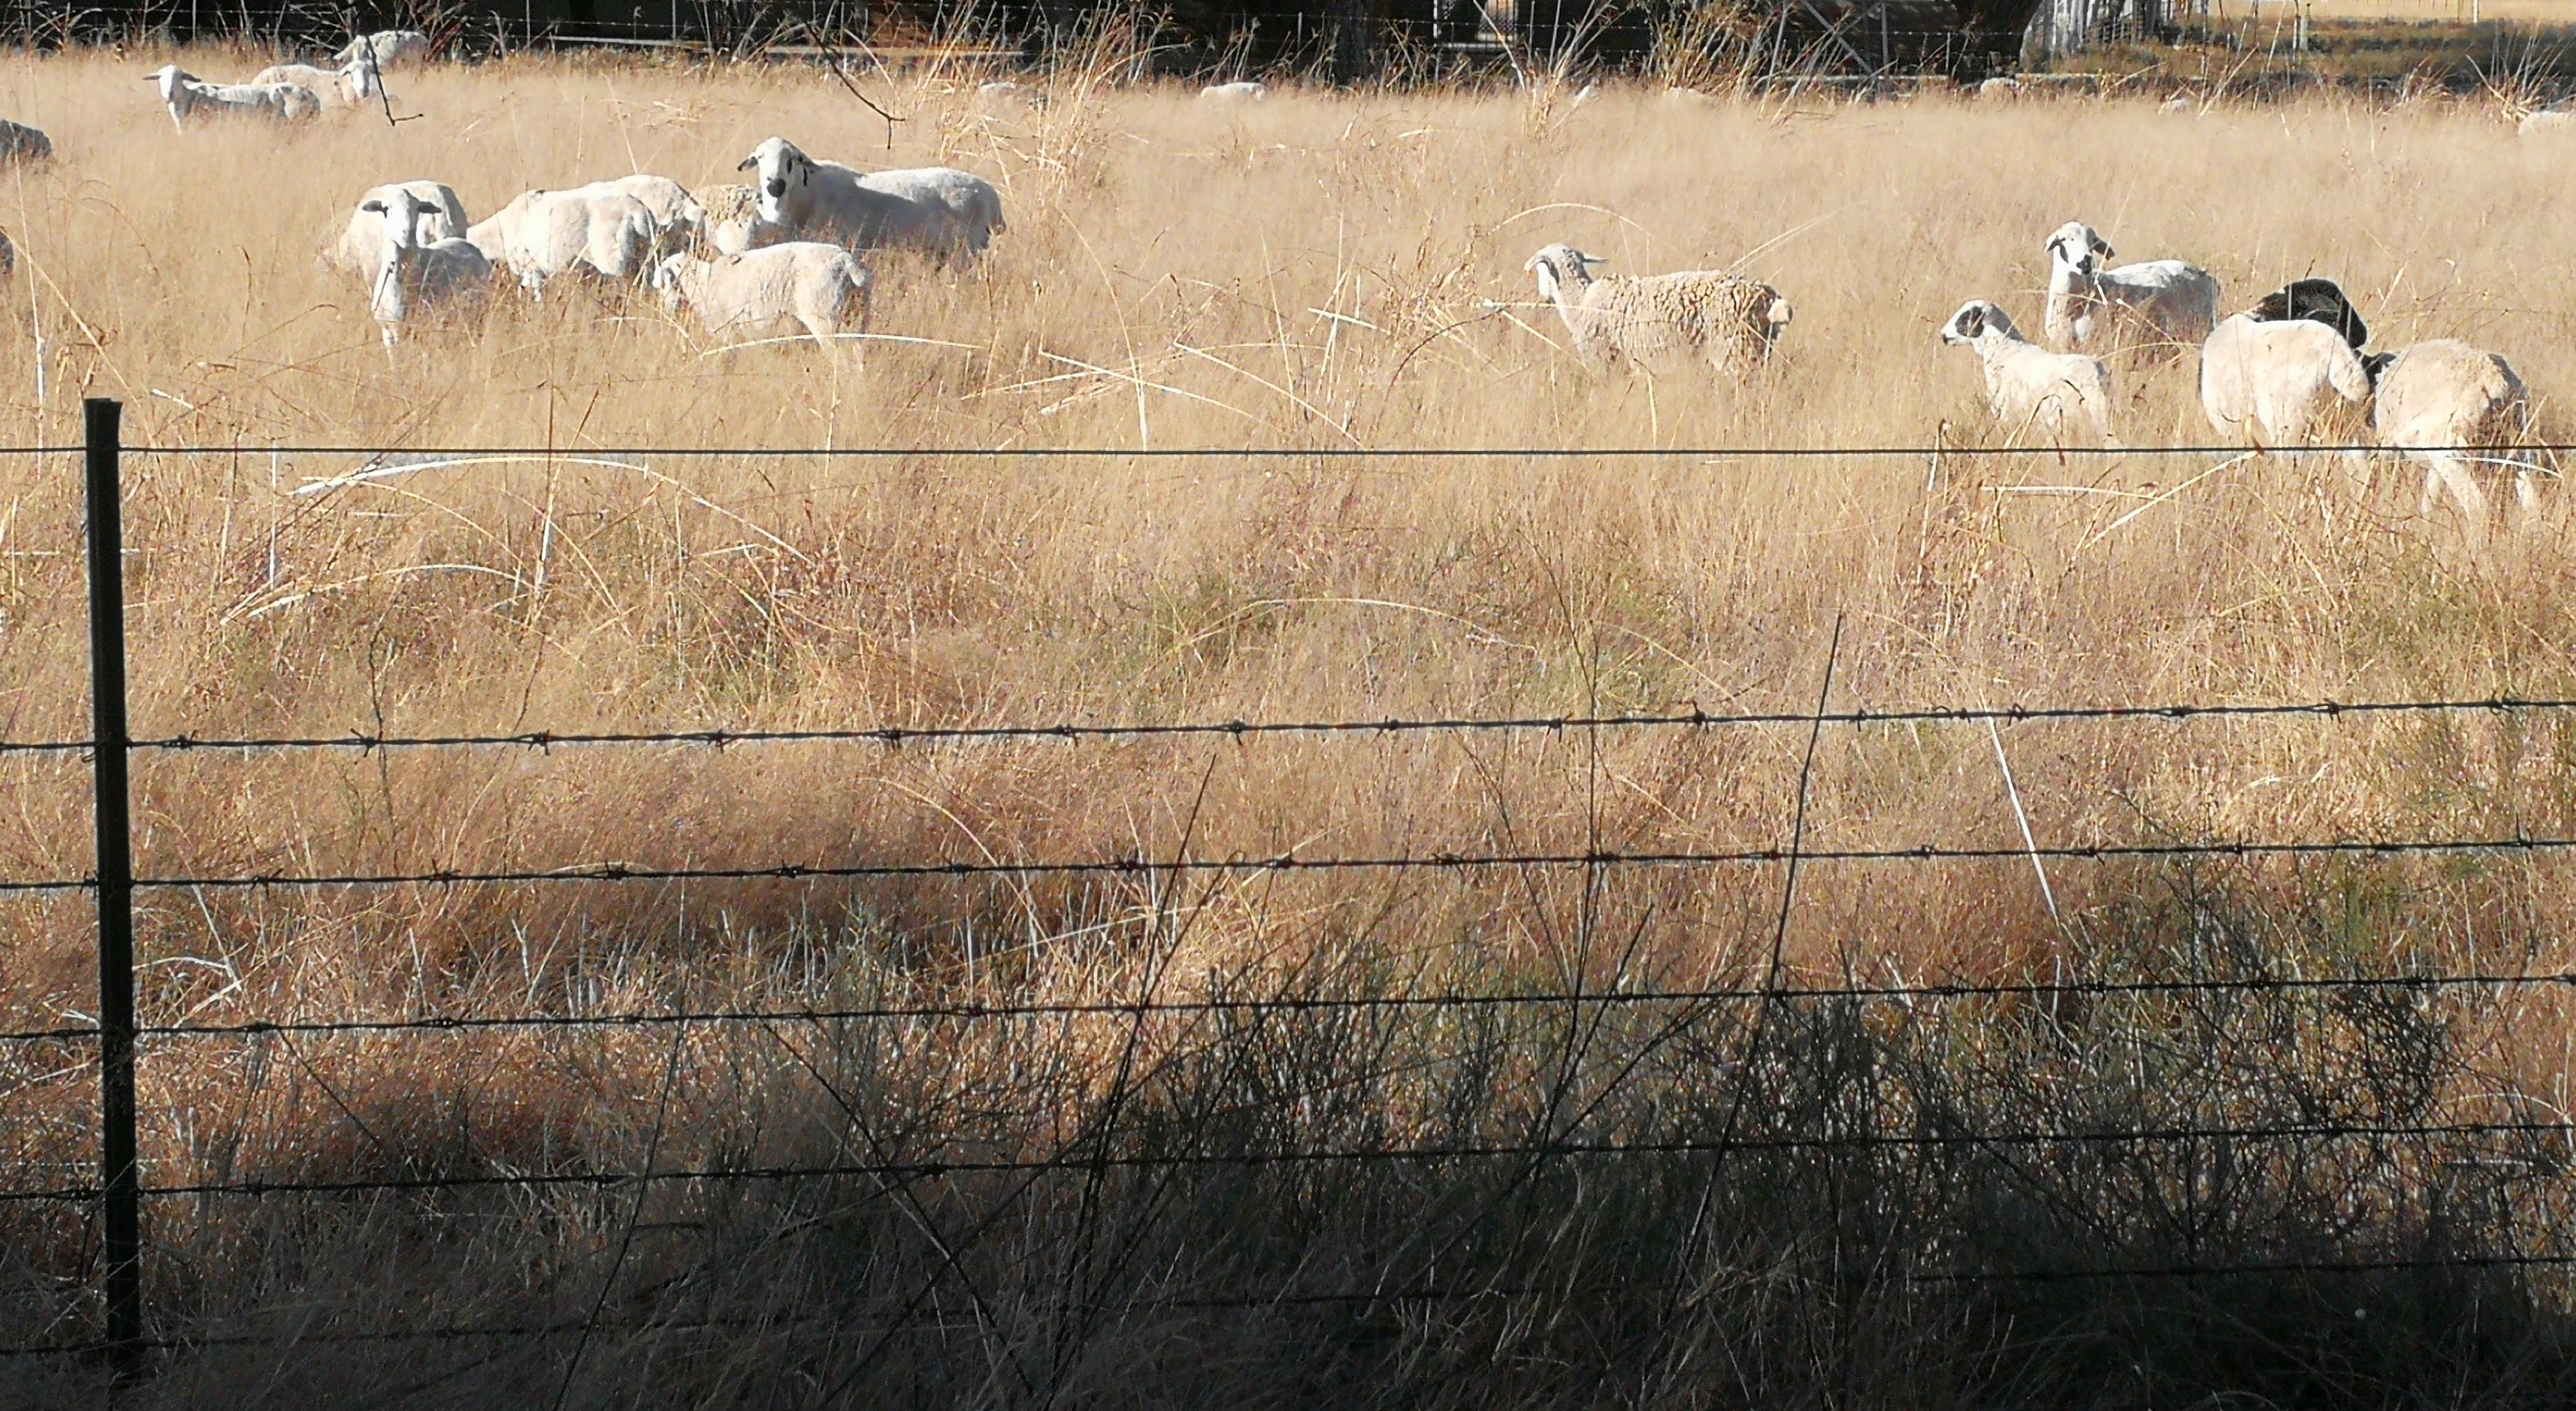 Sheep in the Free State